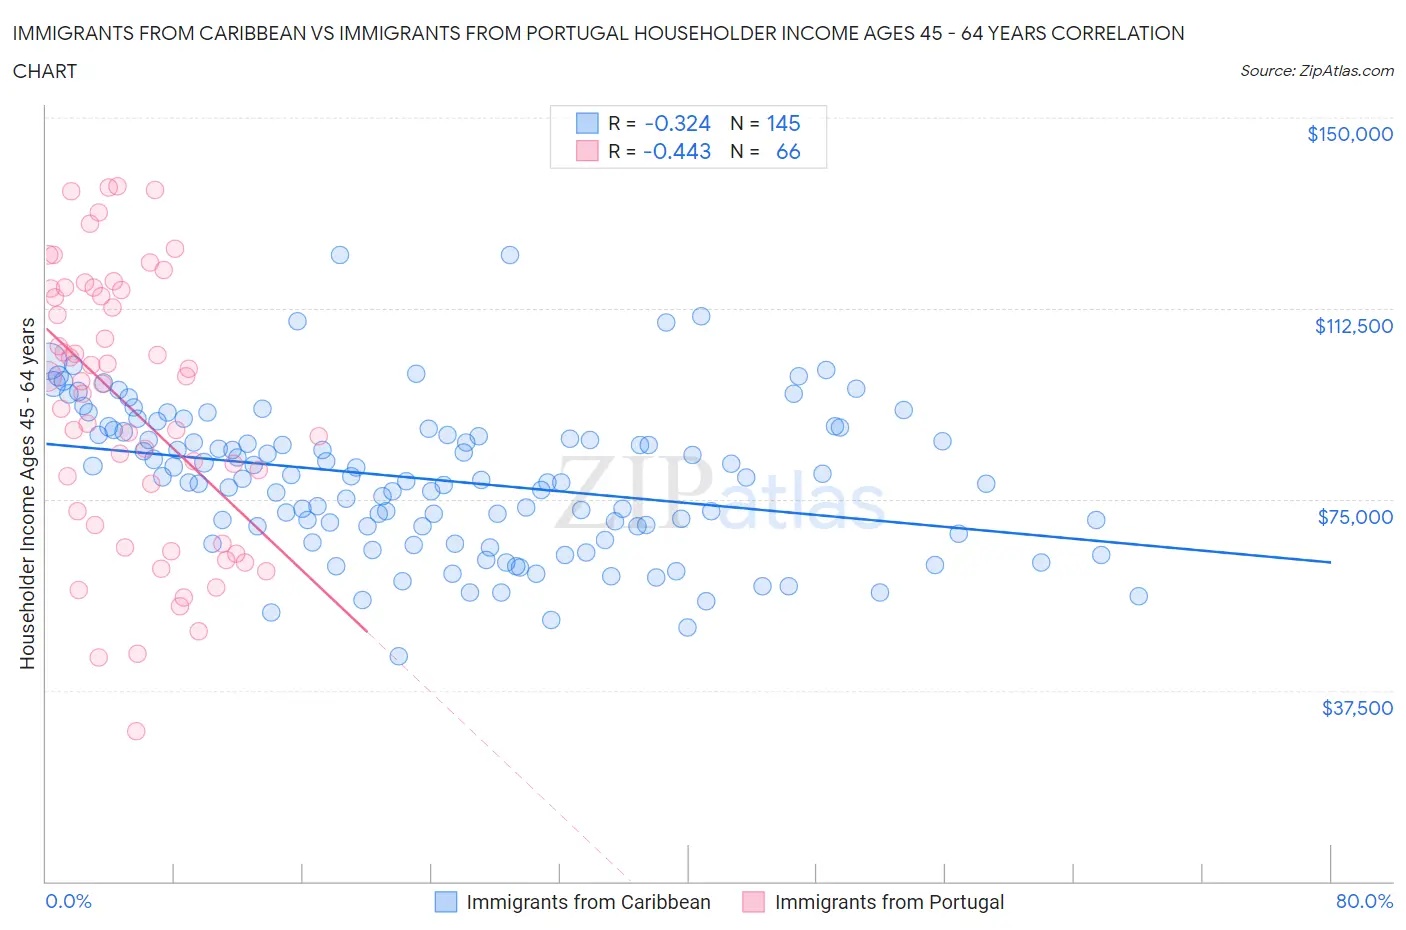 Immigrants from Caribbean vs Immigrants from Portugal Householder Income Ages 45 - 64 years